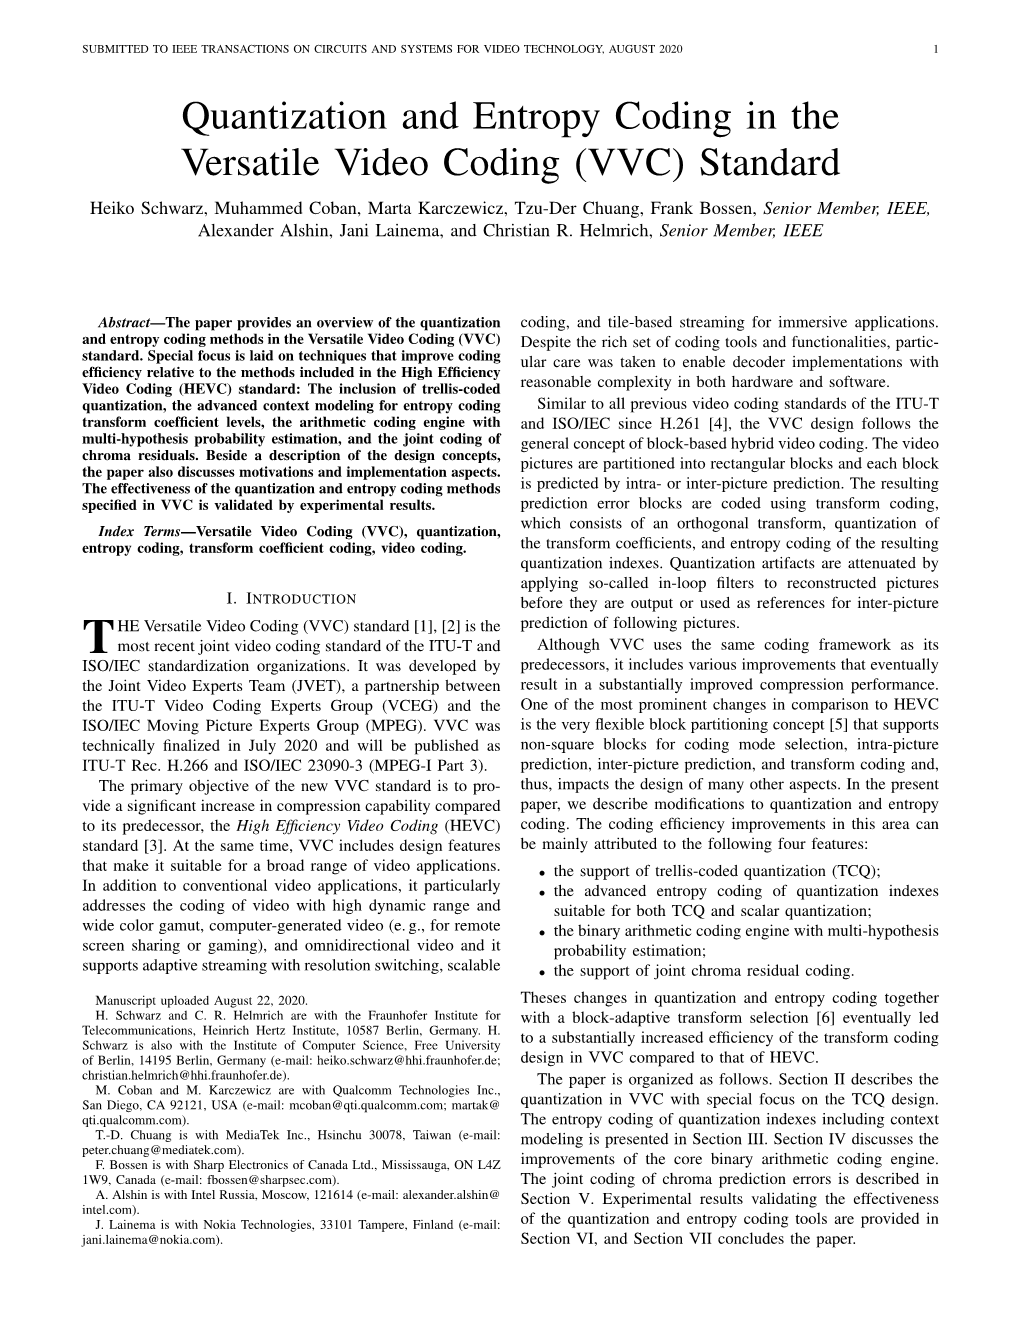 Quantization and Entropy Coding in the Versatile Video Coding (VVC